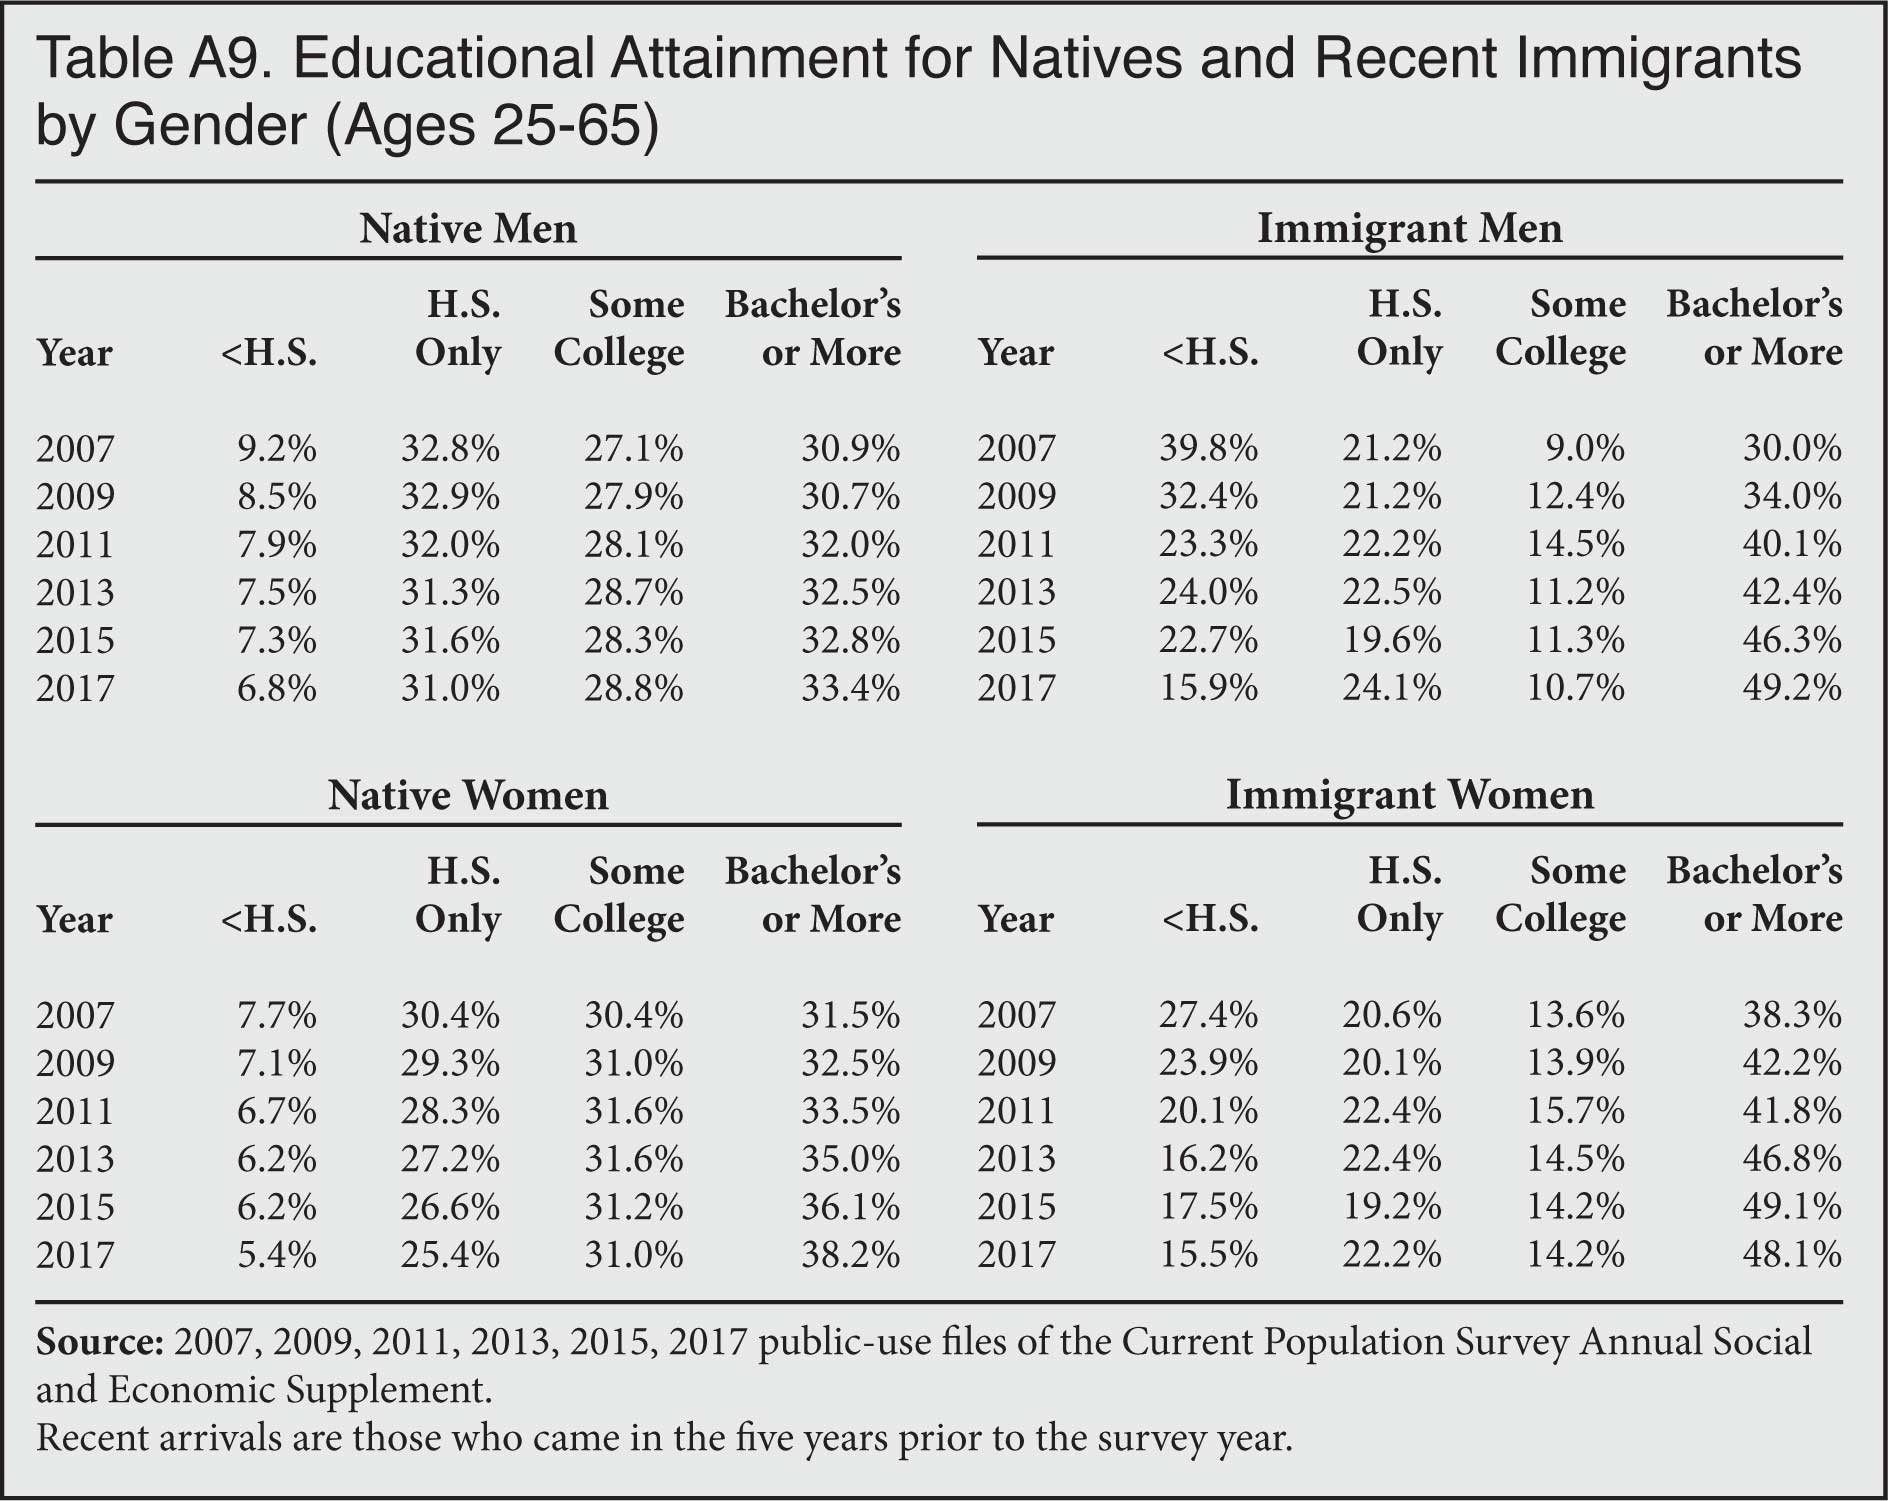 Table: Educational Attainment for Natives and Recent Immigrants by Gender, 2007-2017